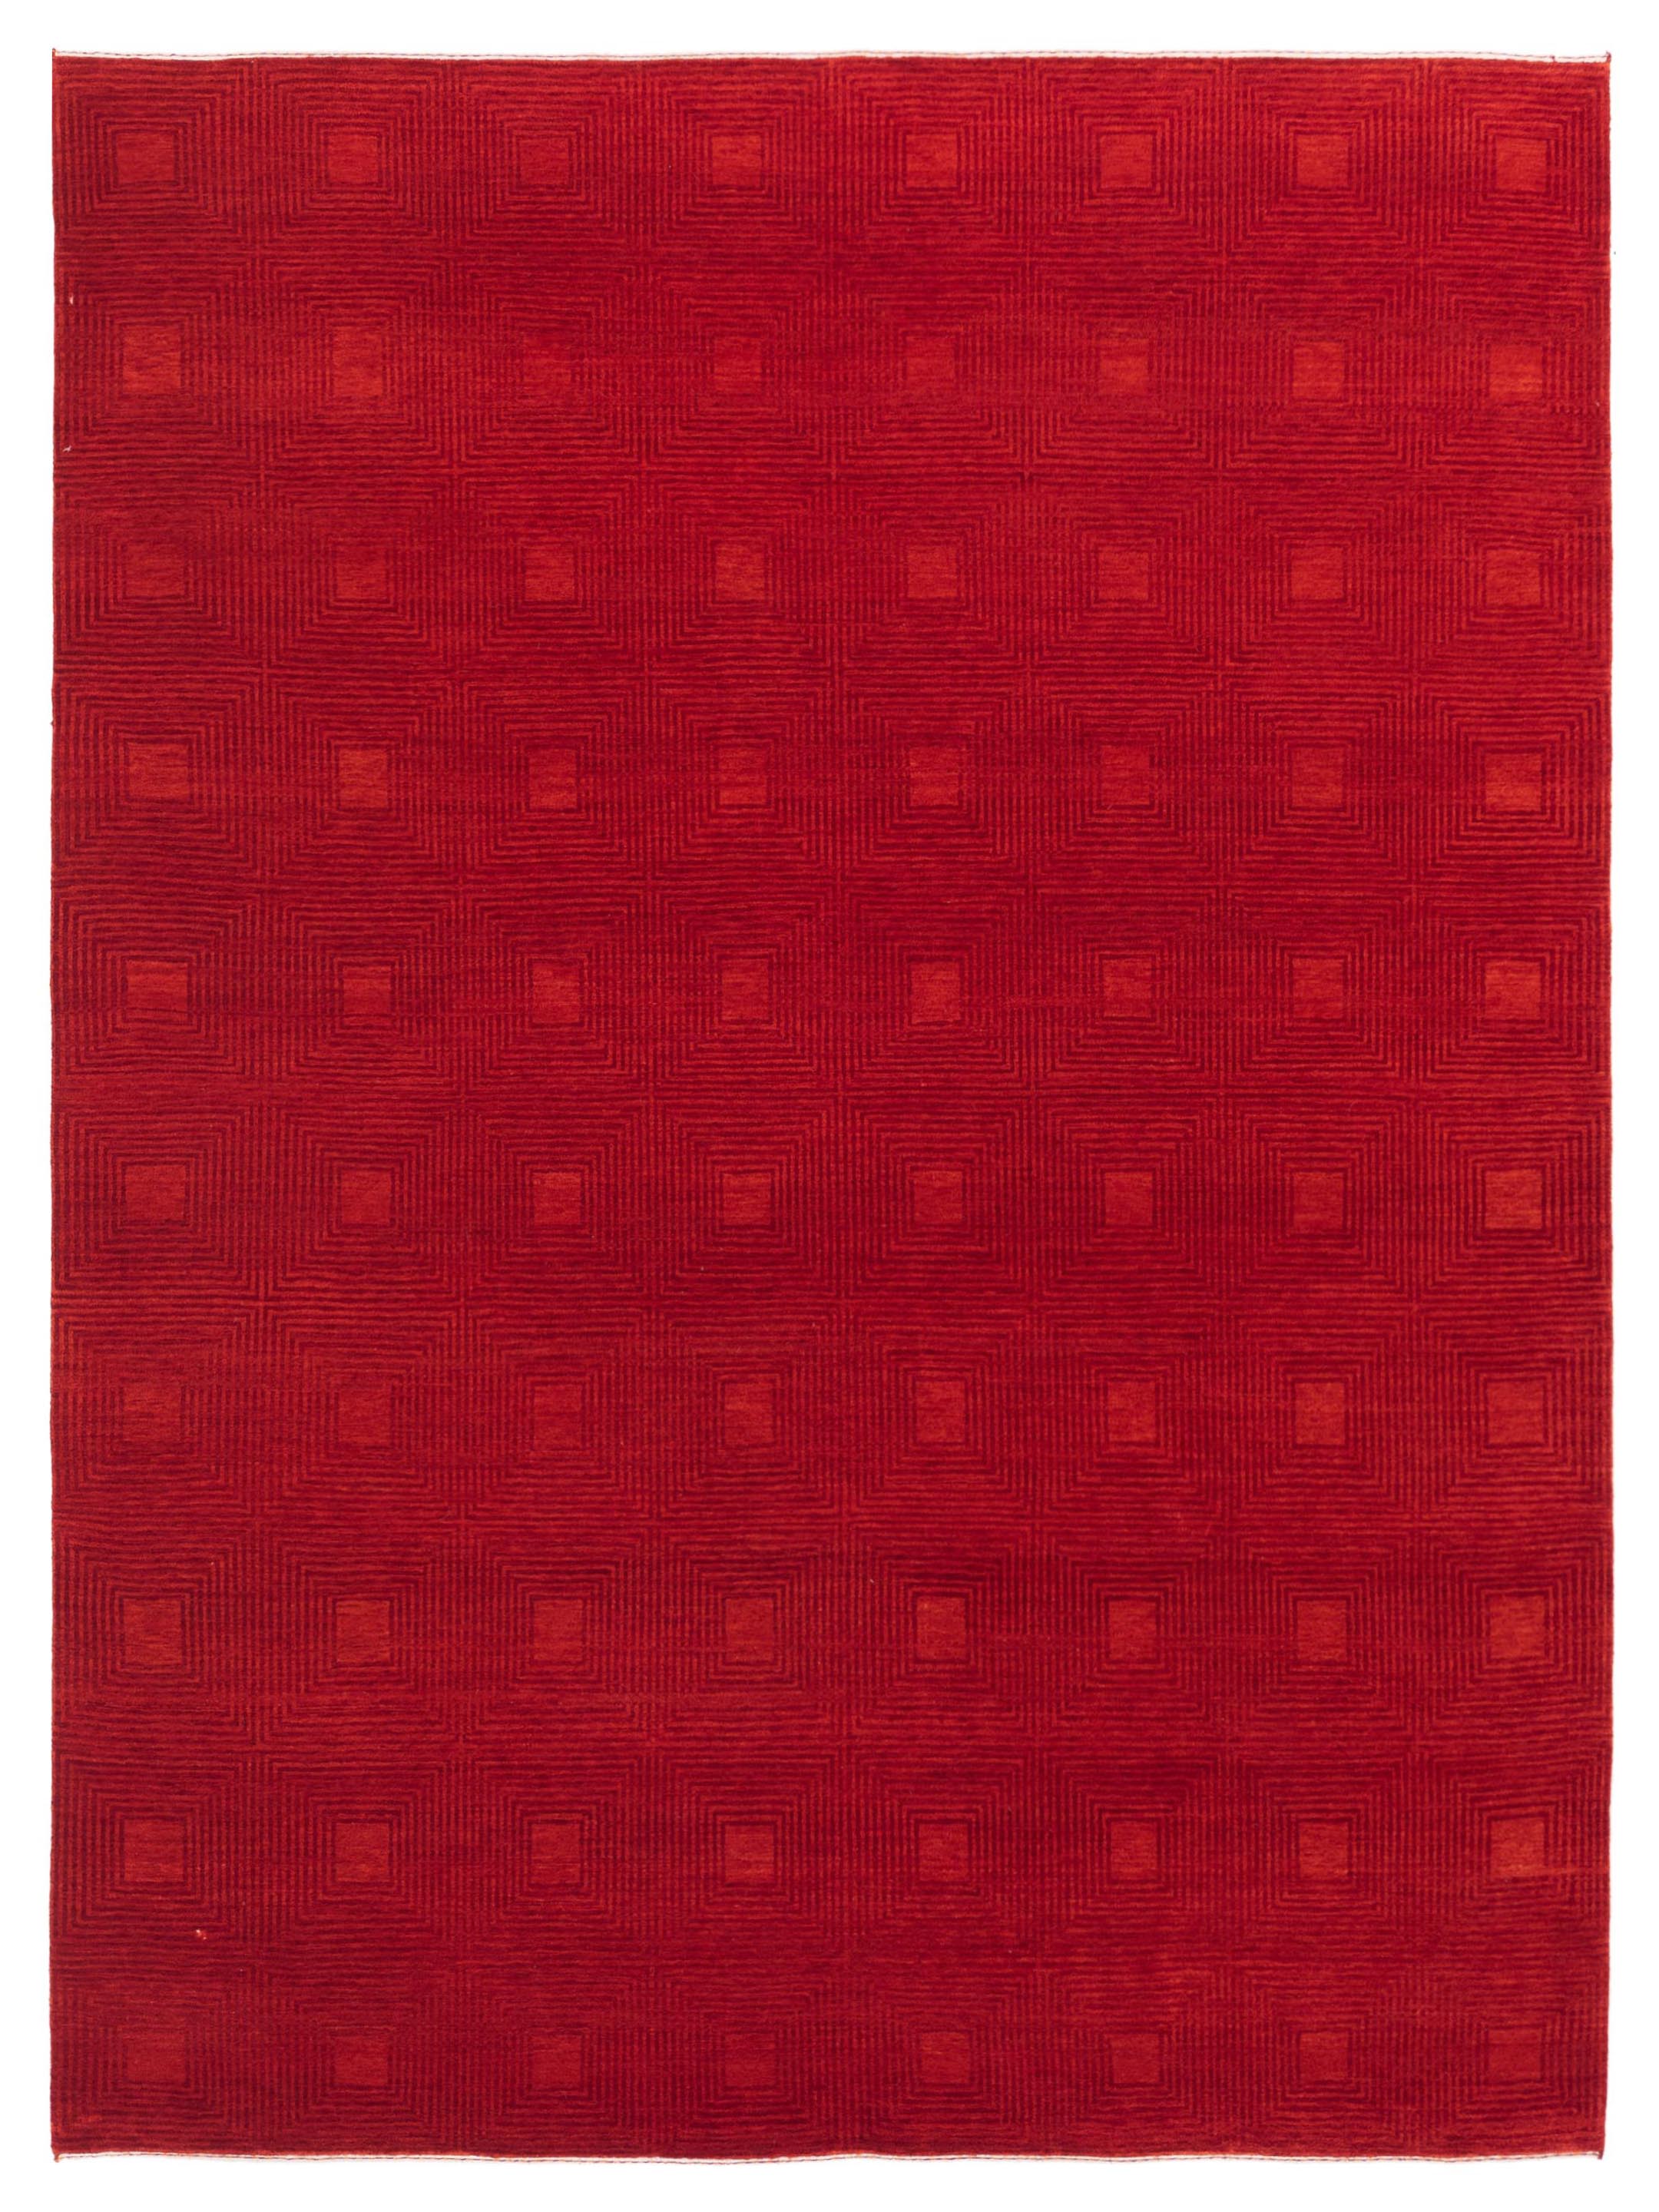 Red Checkered Inspired Rug	